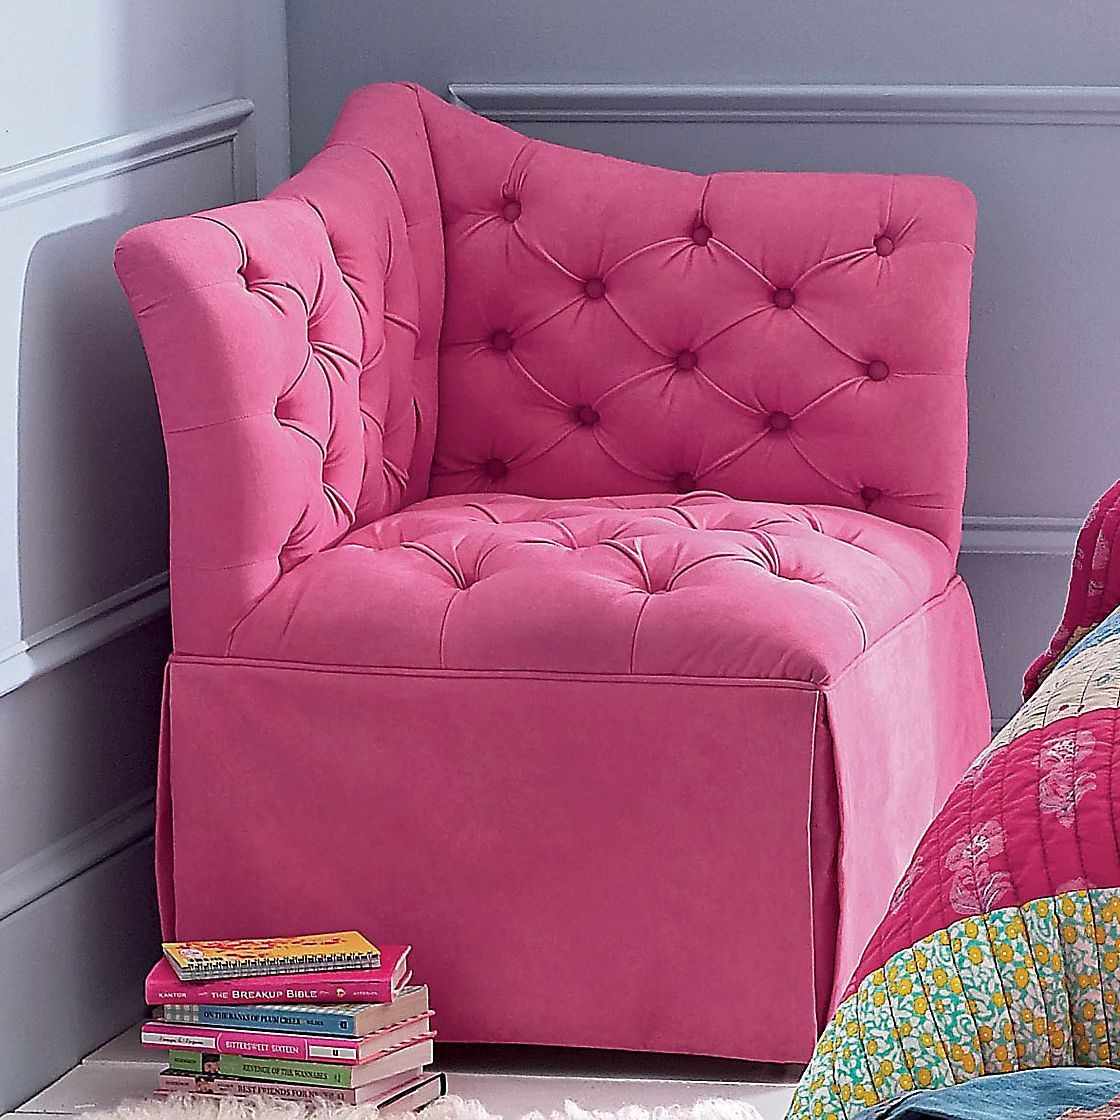 Chair For Teenage Girl Bedroom
 Girlie corner chair thought about doing DIY and making